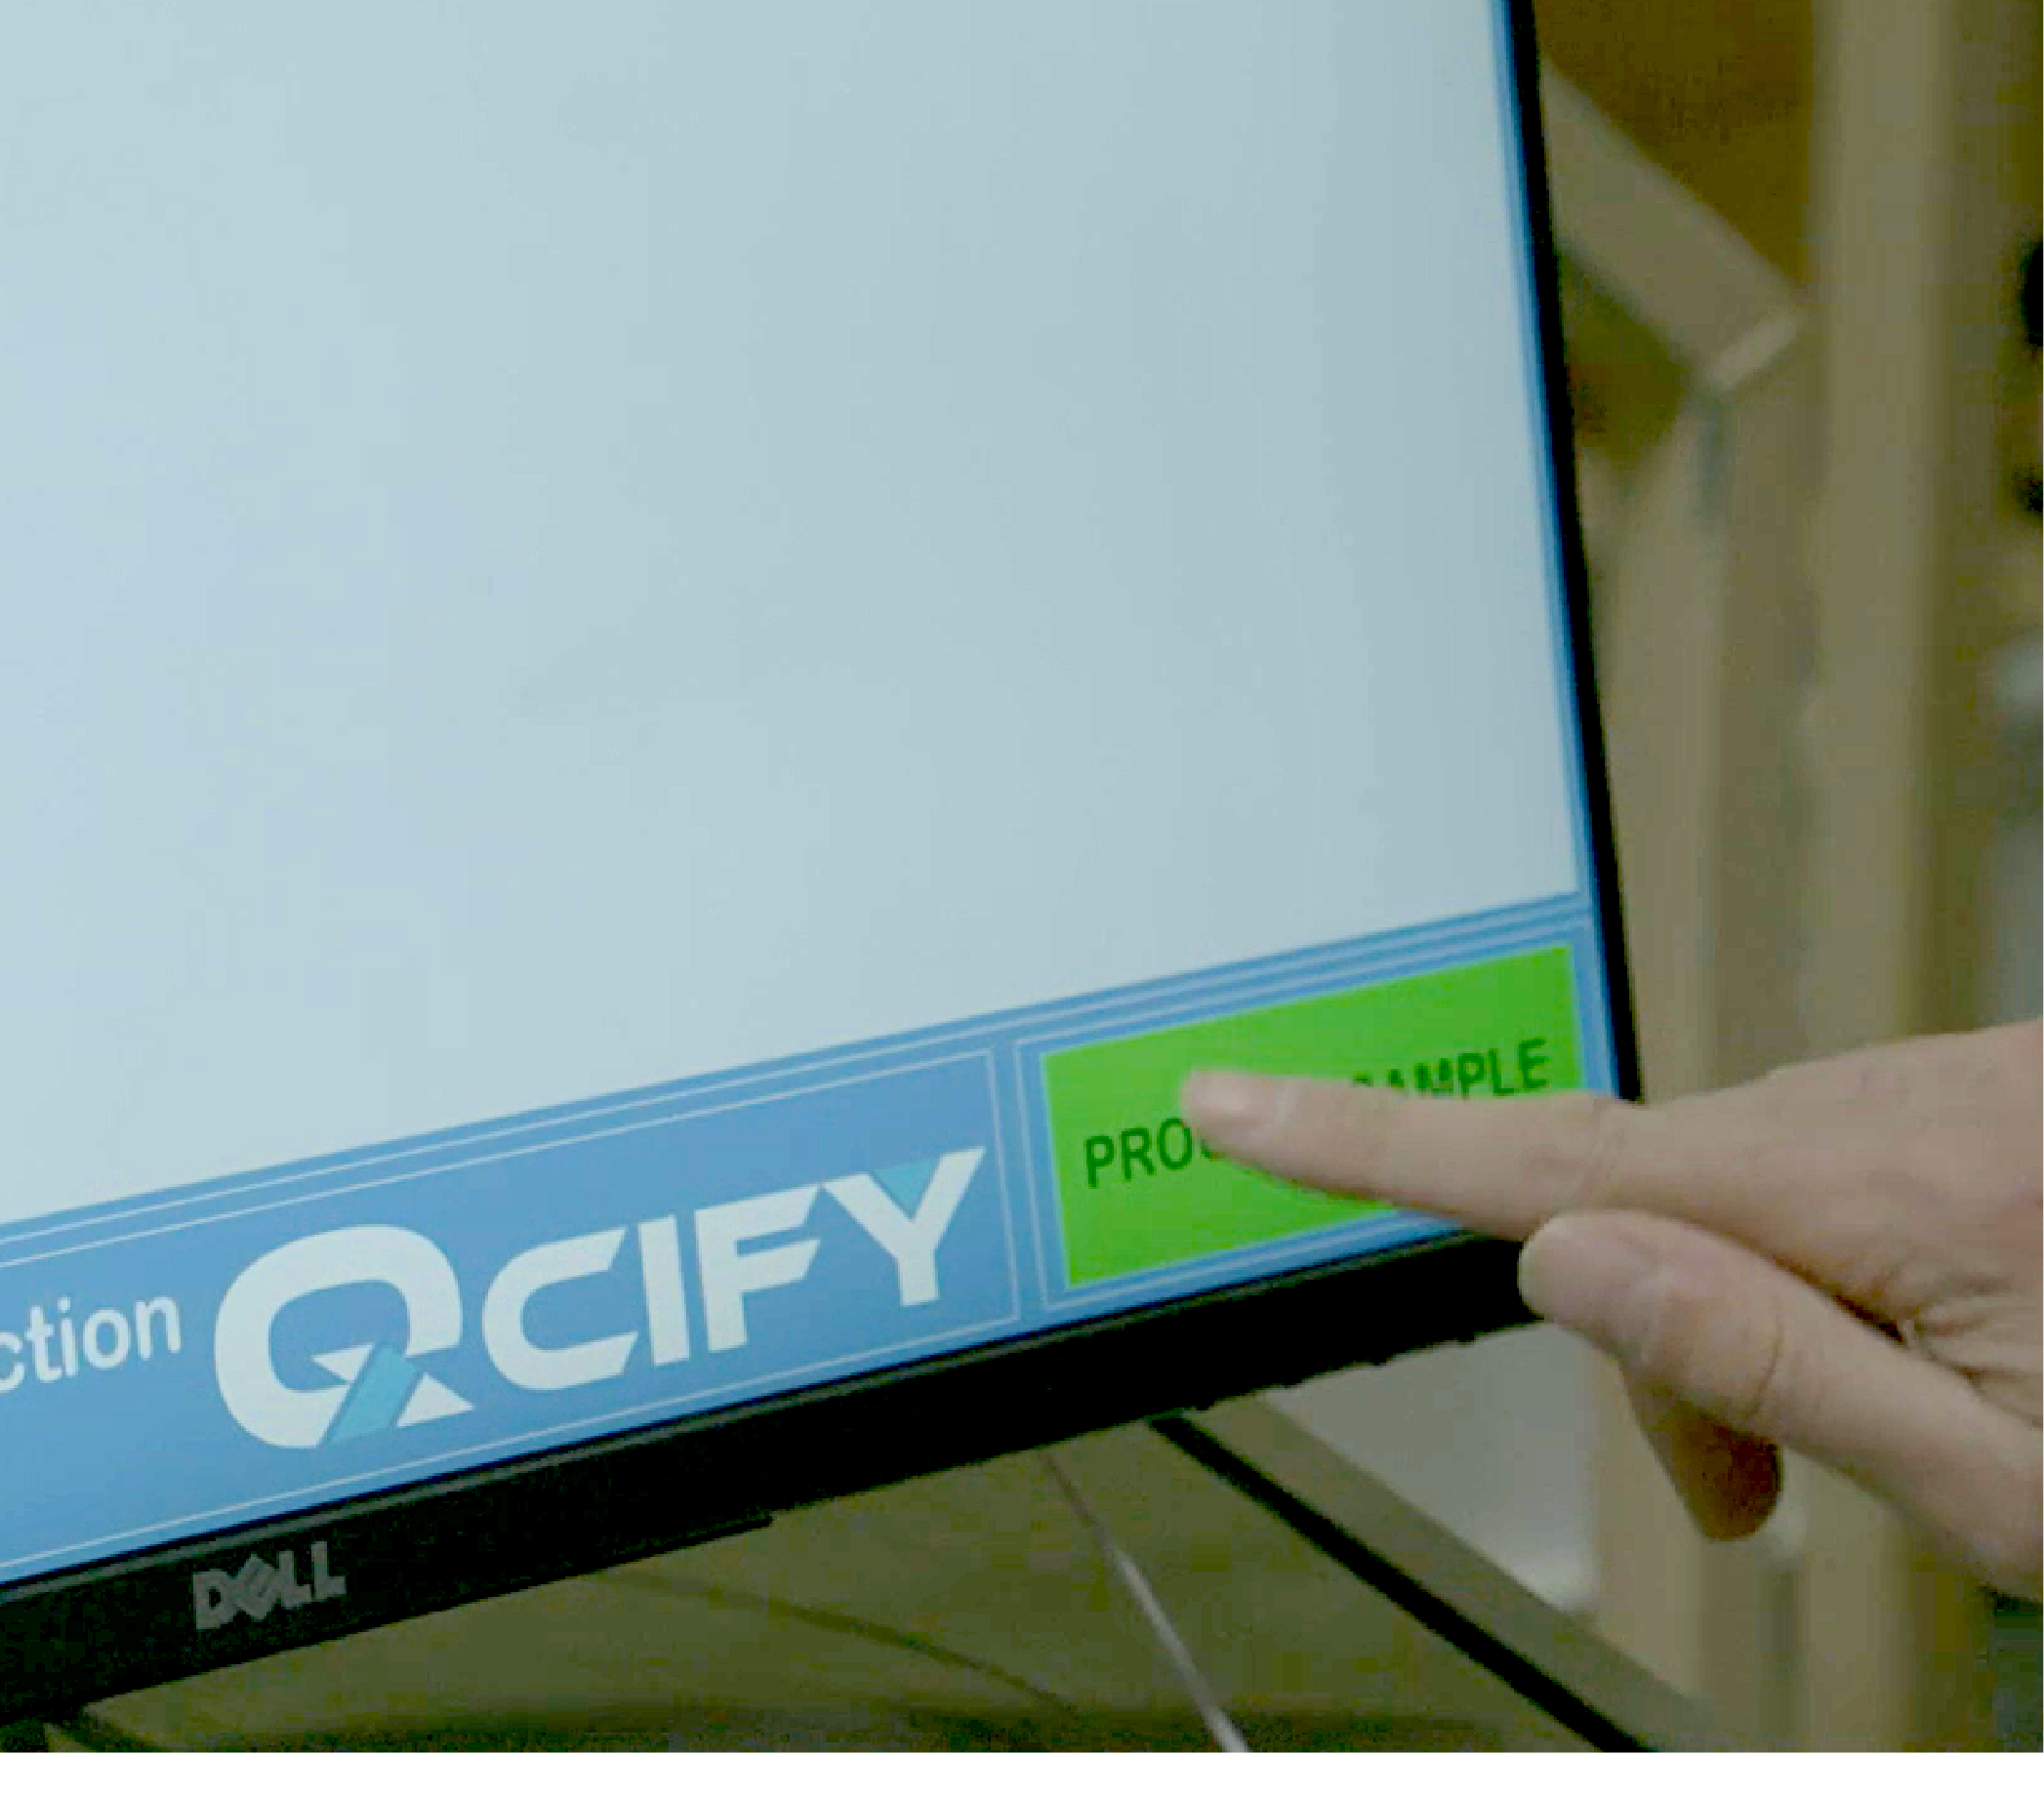 closeup of dell computer monitor with QCIFY logo and finger reaching out to tap green PRODUCT SAMPLE button